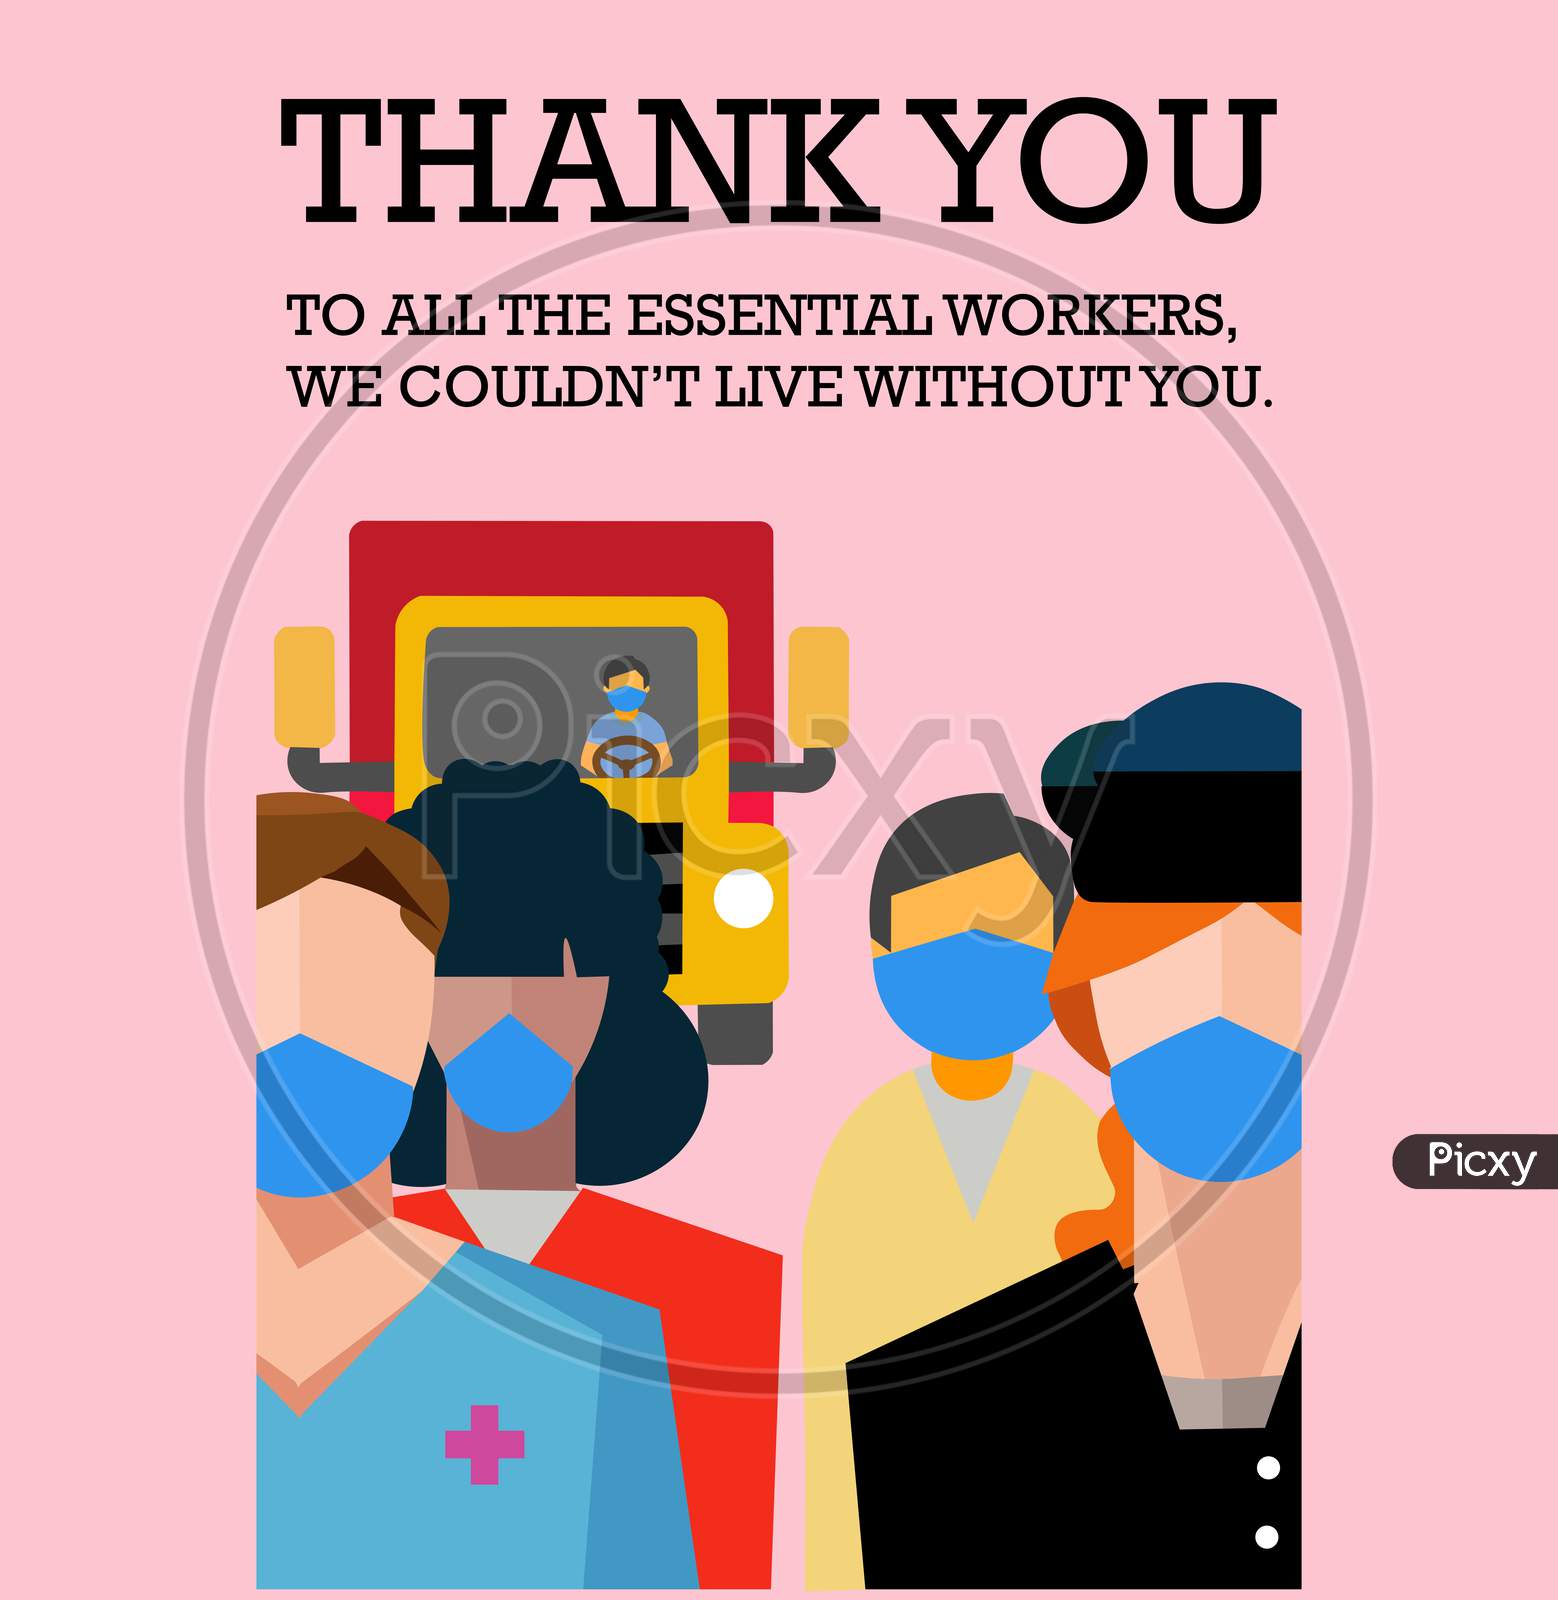 illustration of appreciation for essential worker, Doctor, policeman, Street sweeper & truck driver for their service amid corona virus outbreak